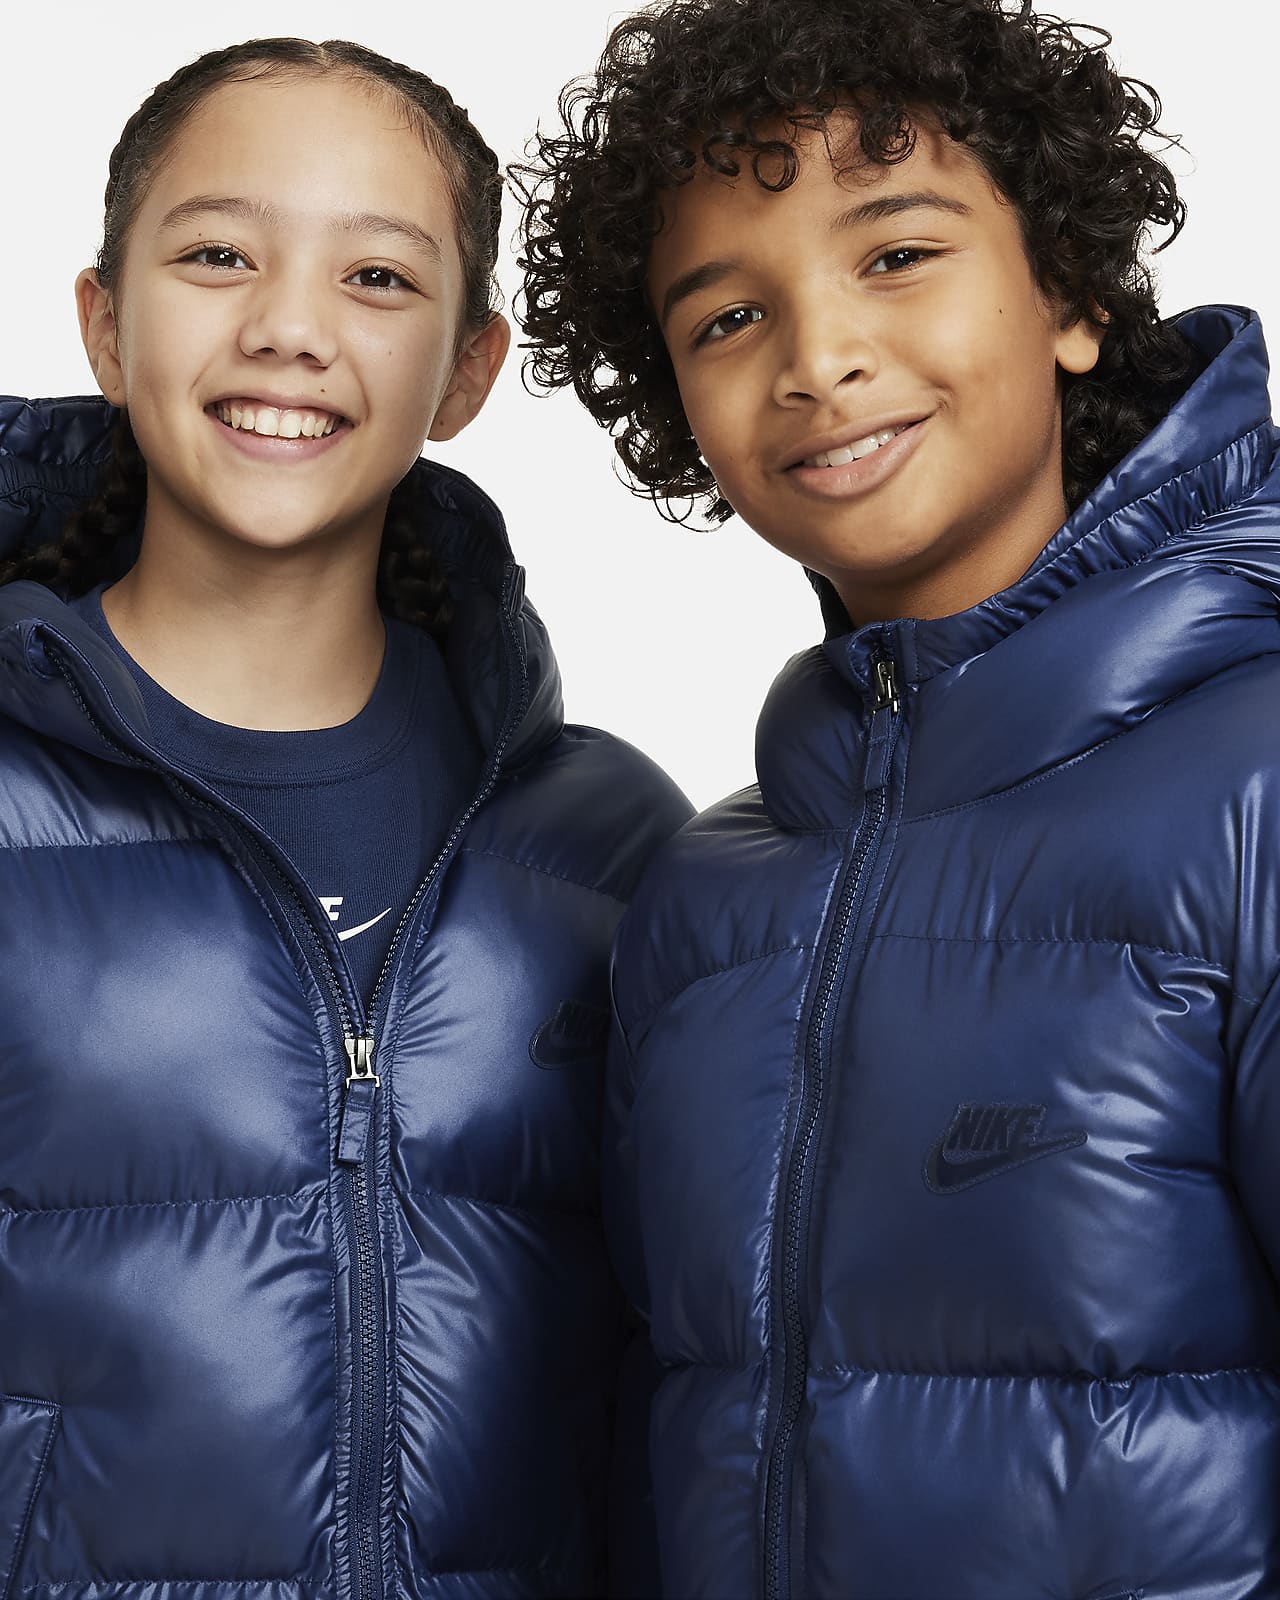 Nike Sportswear Heavyweight Synthetic Fill EasyOn Big Kids' Therma-FIT  Repel Loose Hooded Parka